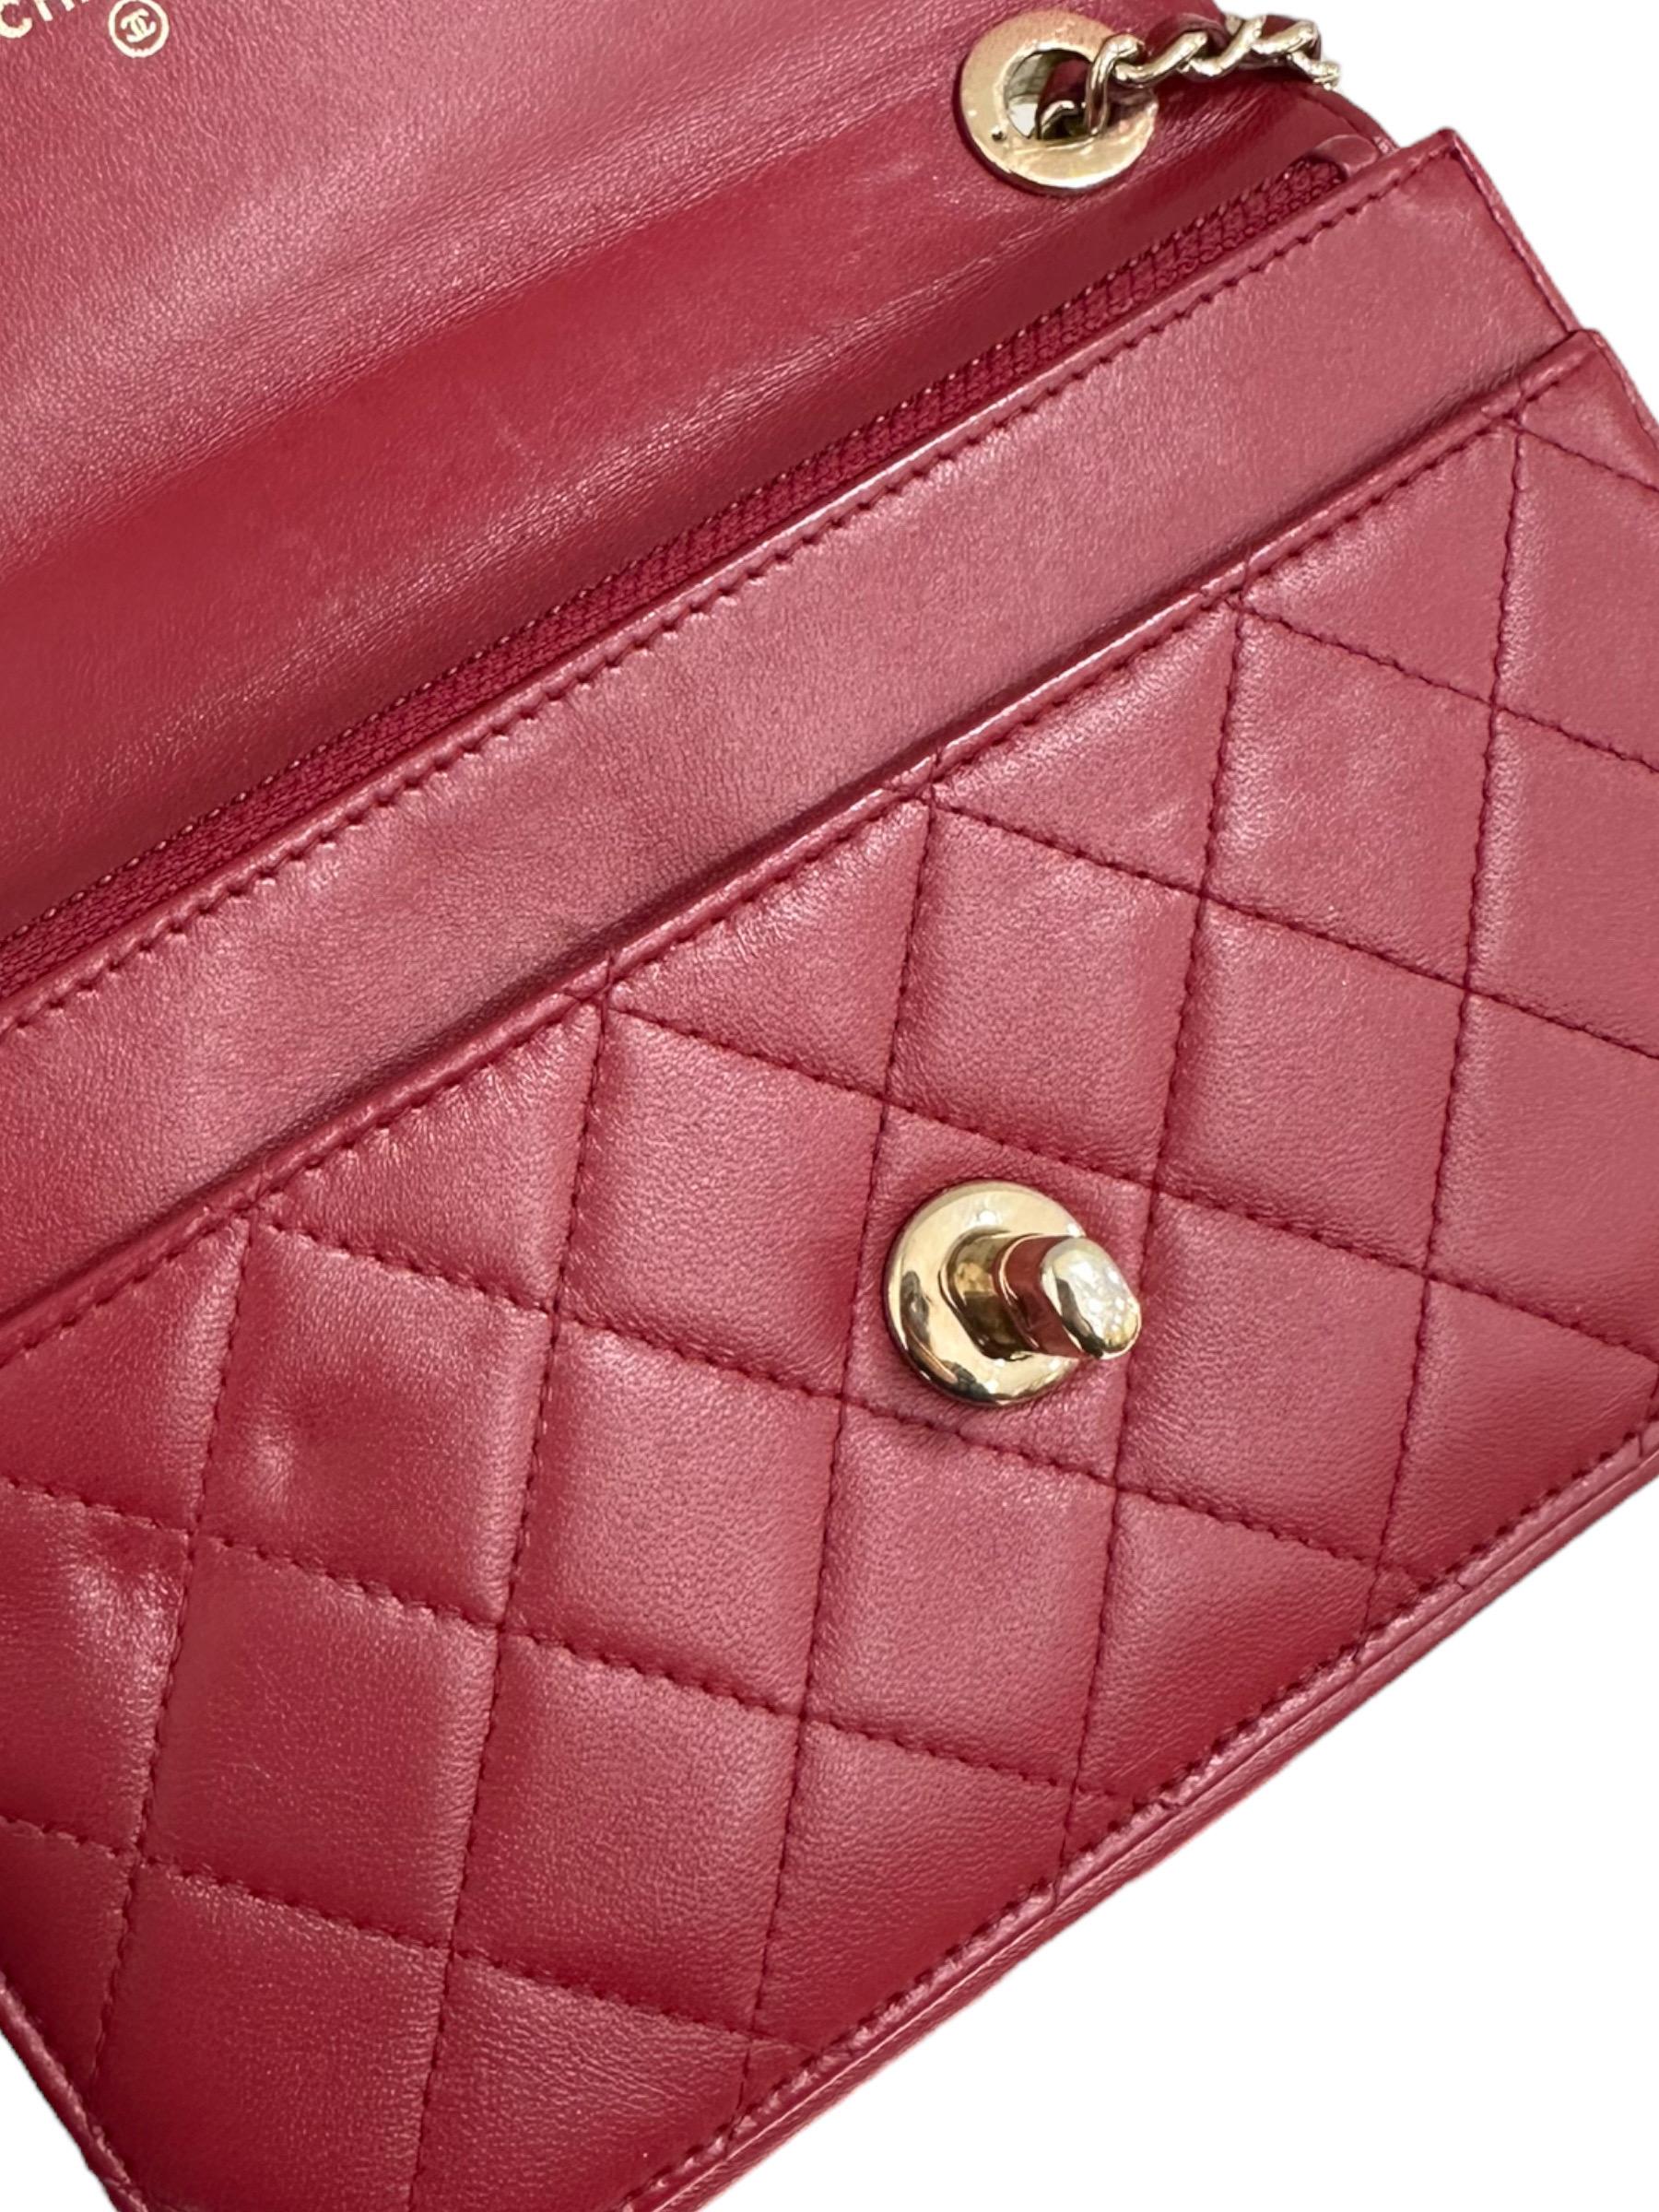 Borsa A Tracolla Chanel Wallet On Chain Rossa 2016/2017 8